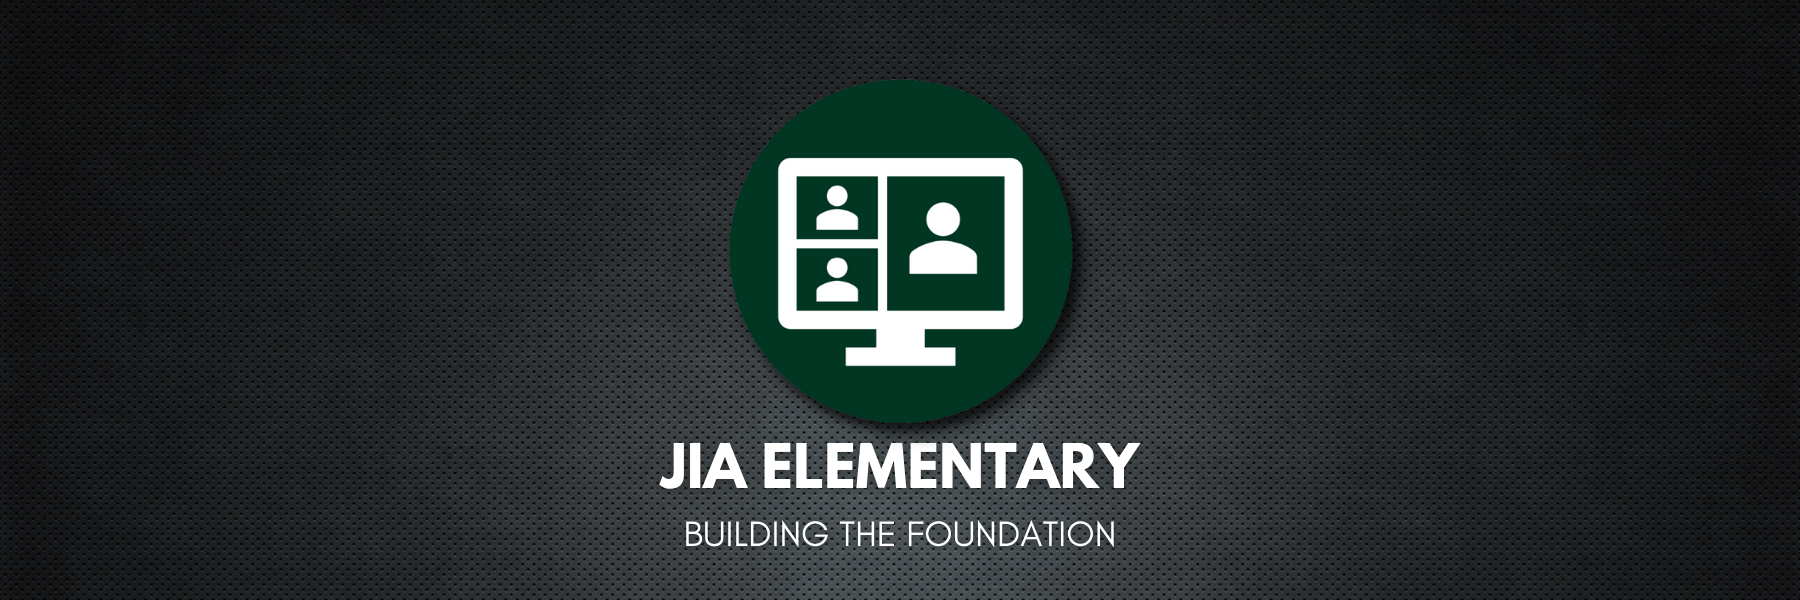 JIA Elementary: Building the Foundation